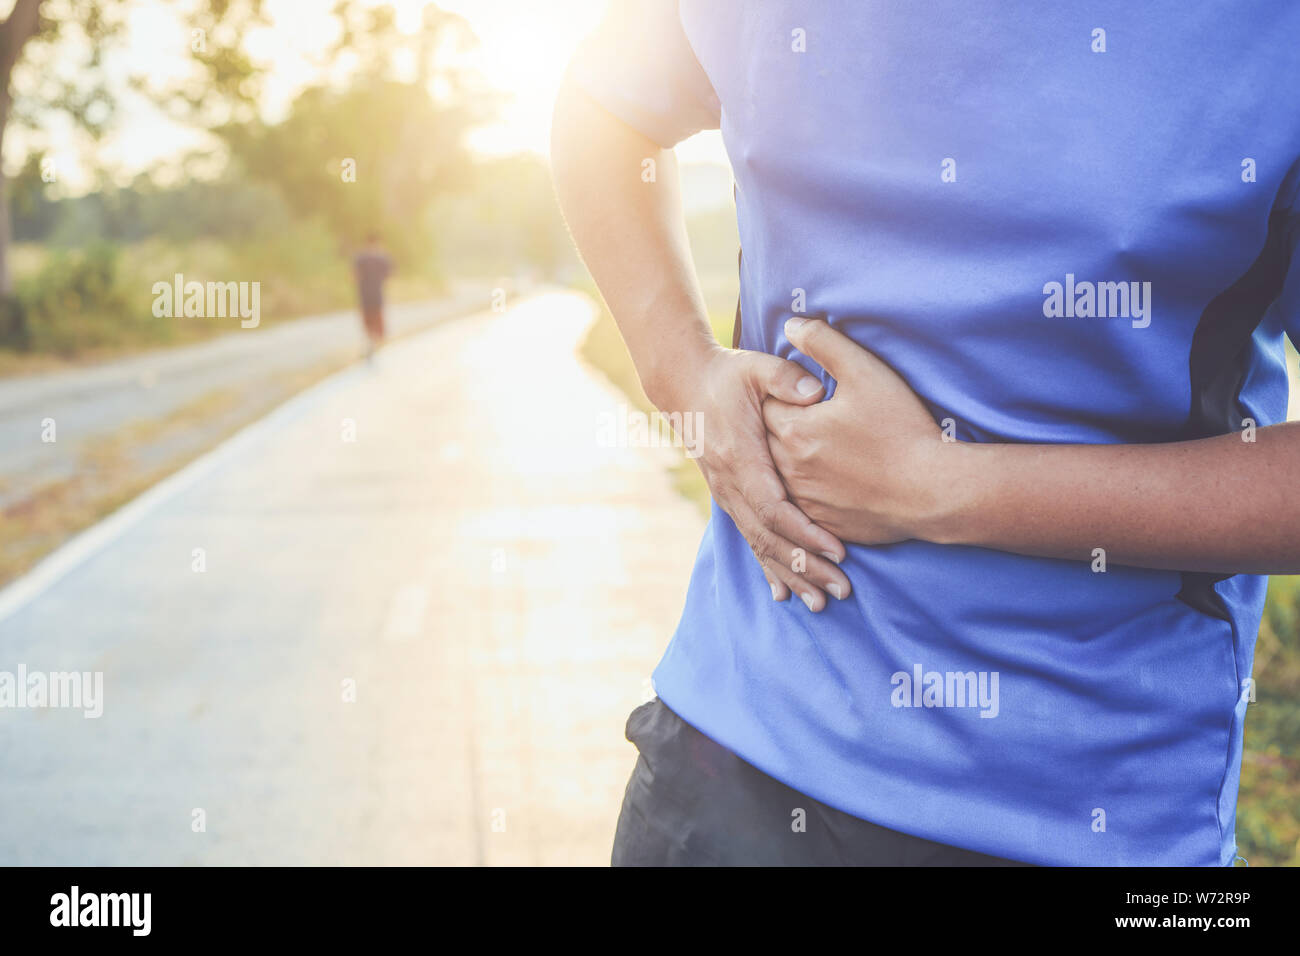 Stomach cramps or Injury while workout concept : The asian man use hands hold on his stomach while running on road in the park Stock Photo